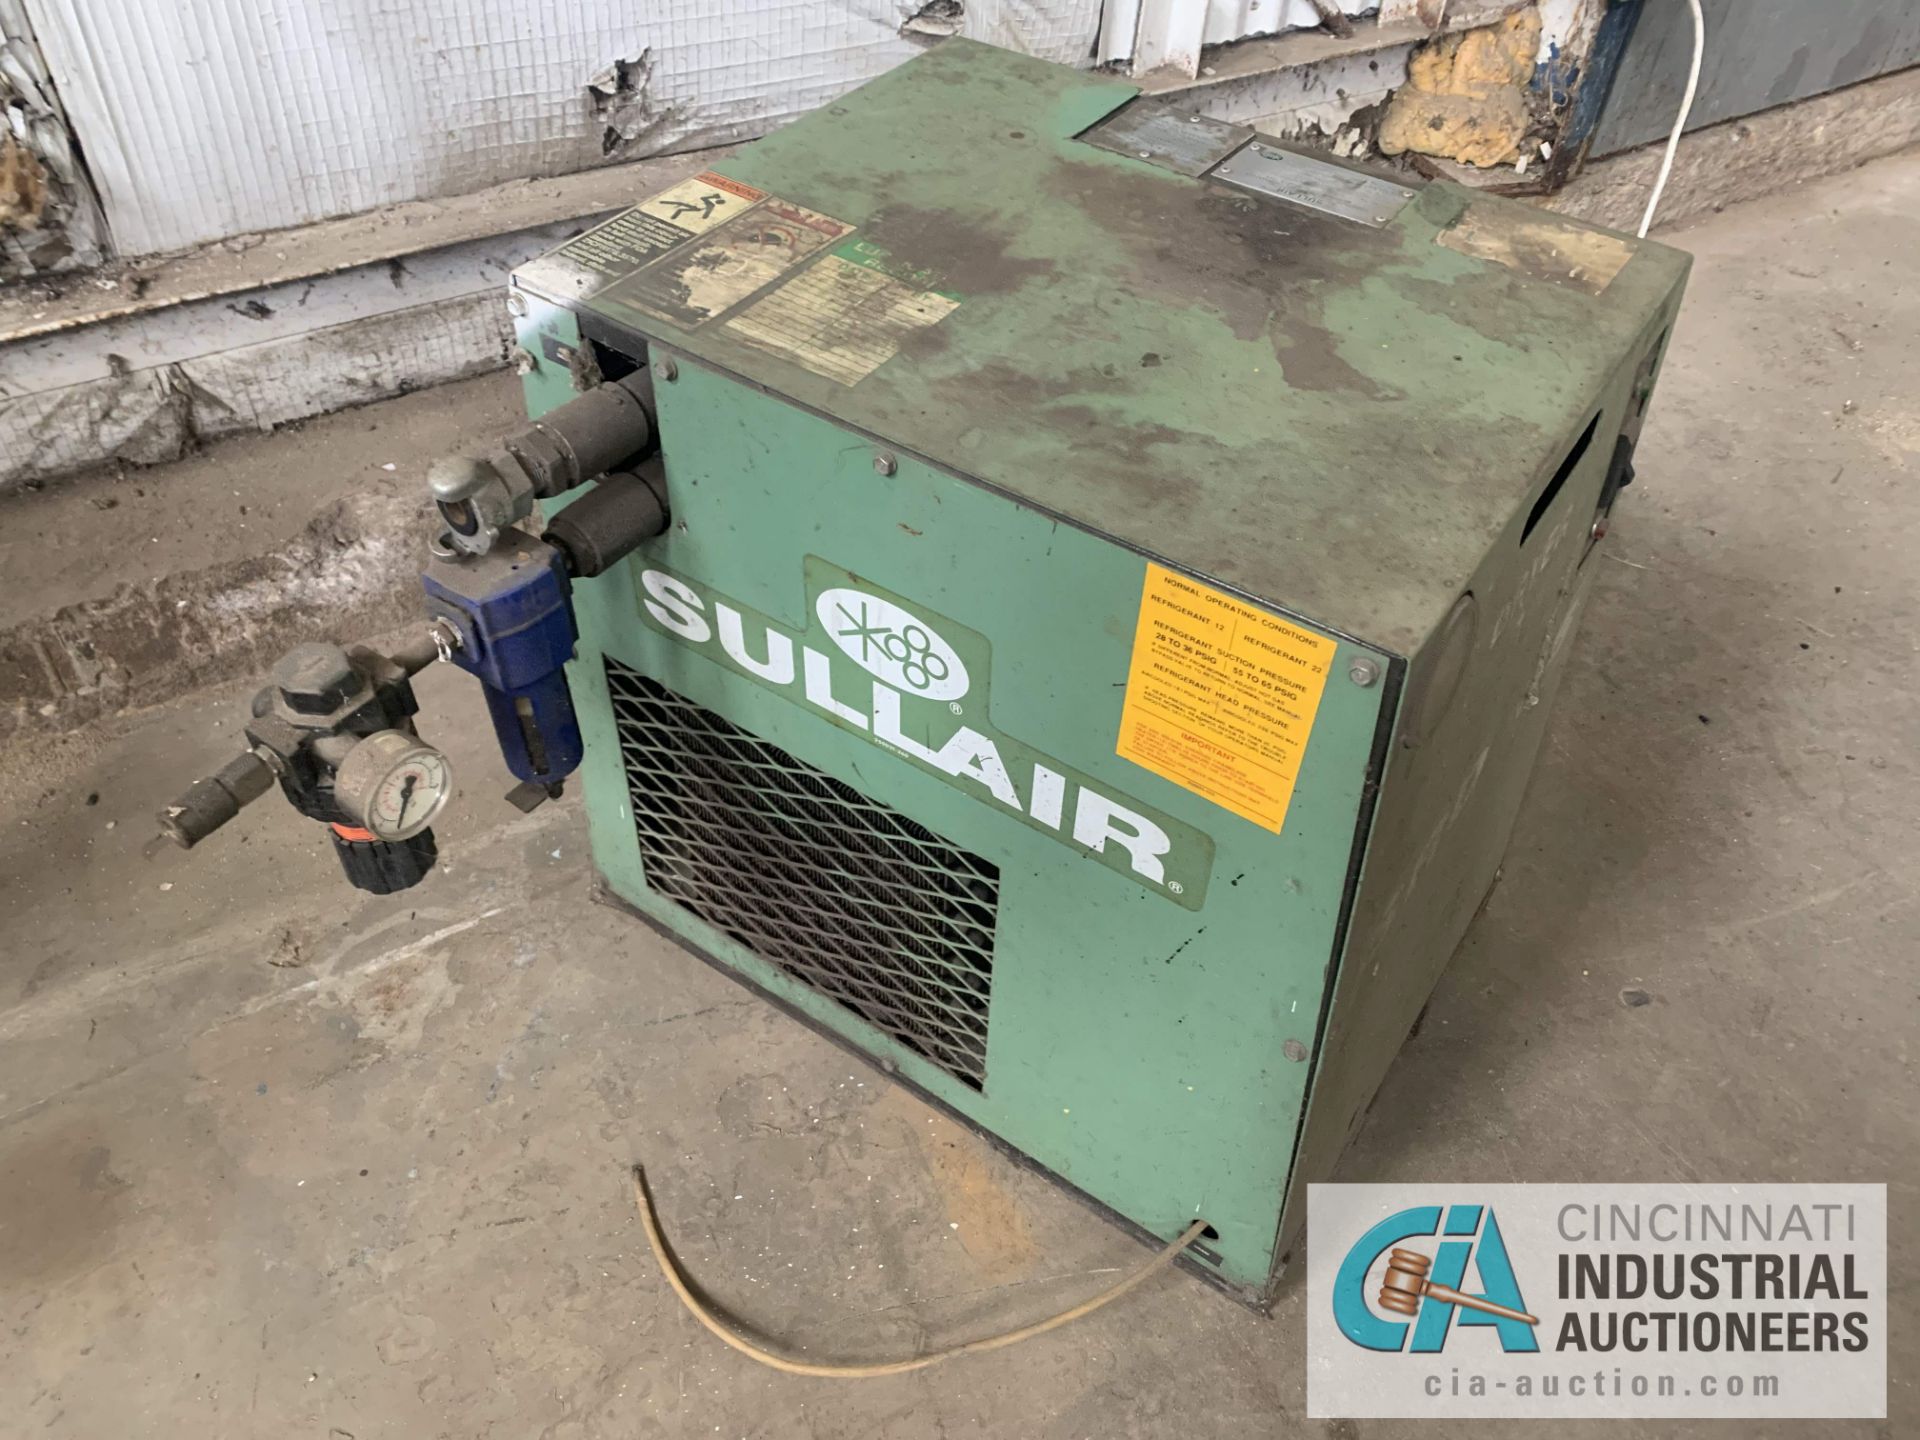 150 PSI SULLAIR MODEL SRD-35 A/C AIR DRYER - $20.00 Rigging Fee Due to Onsite Rigger - Located in